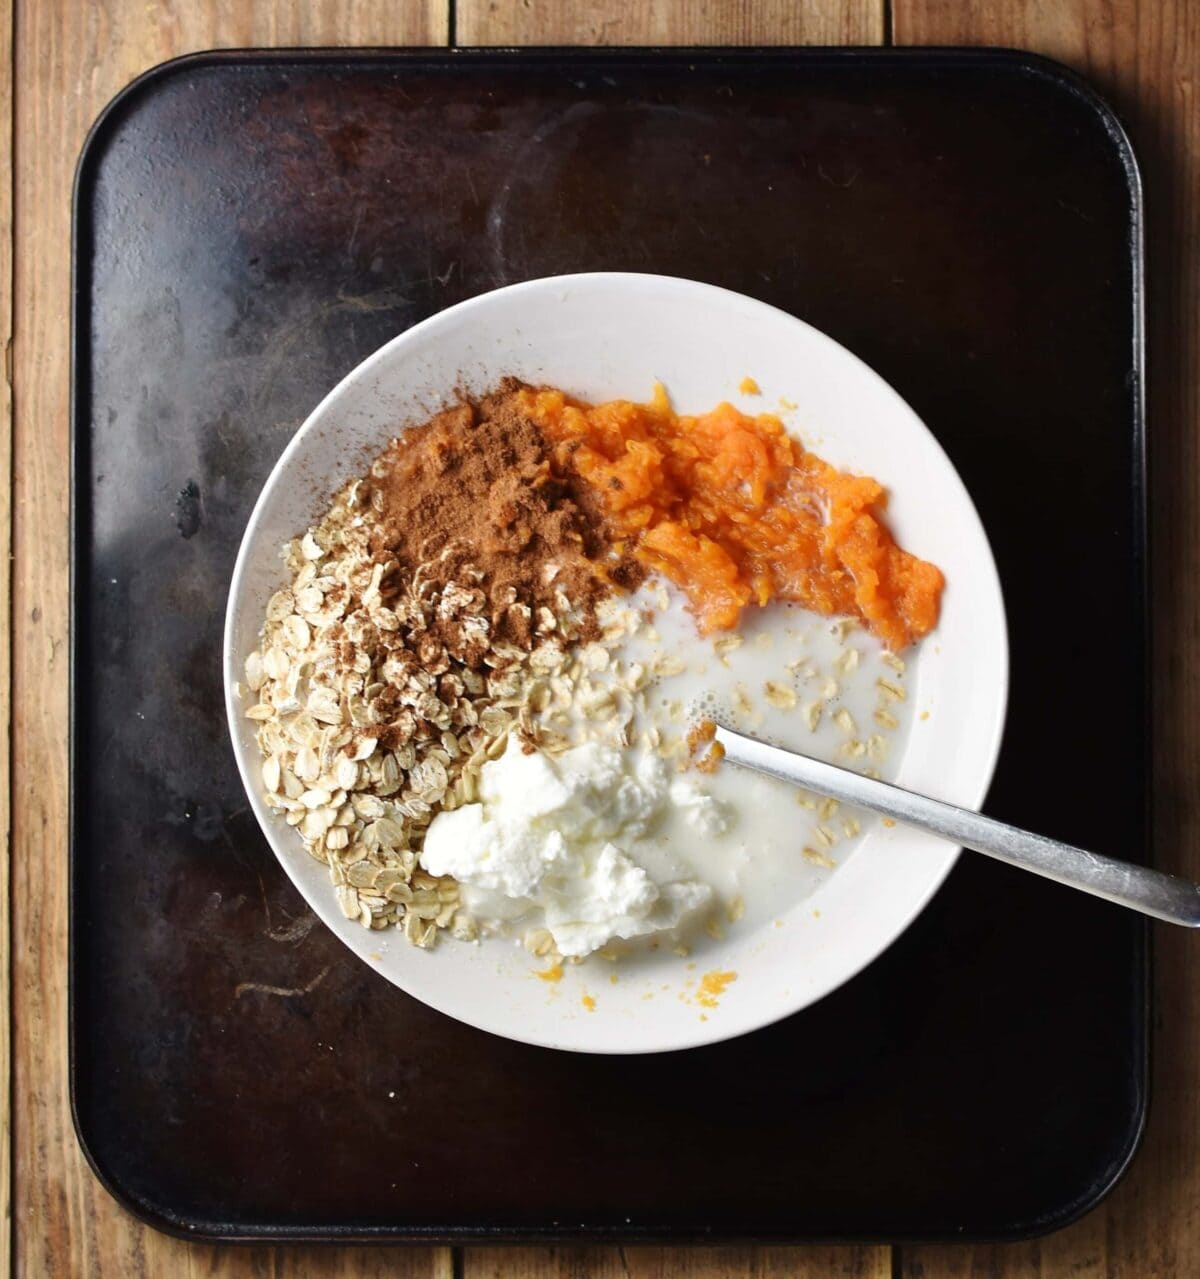 Top down view of oats, milk, spice, yogurt and mashed sweet potato in white bowl with spoon.